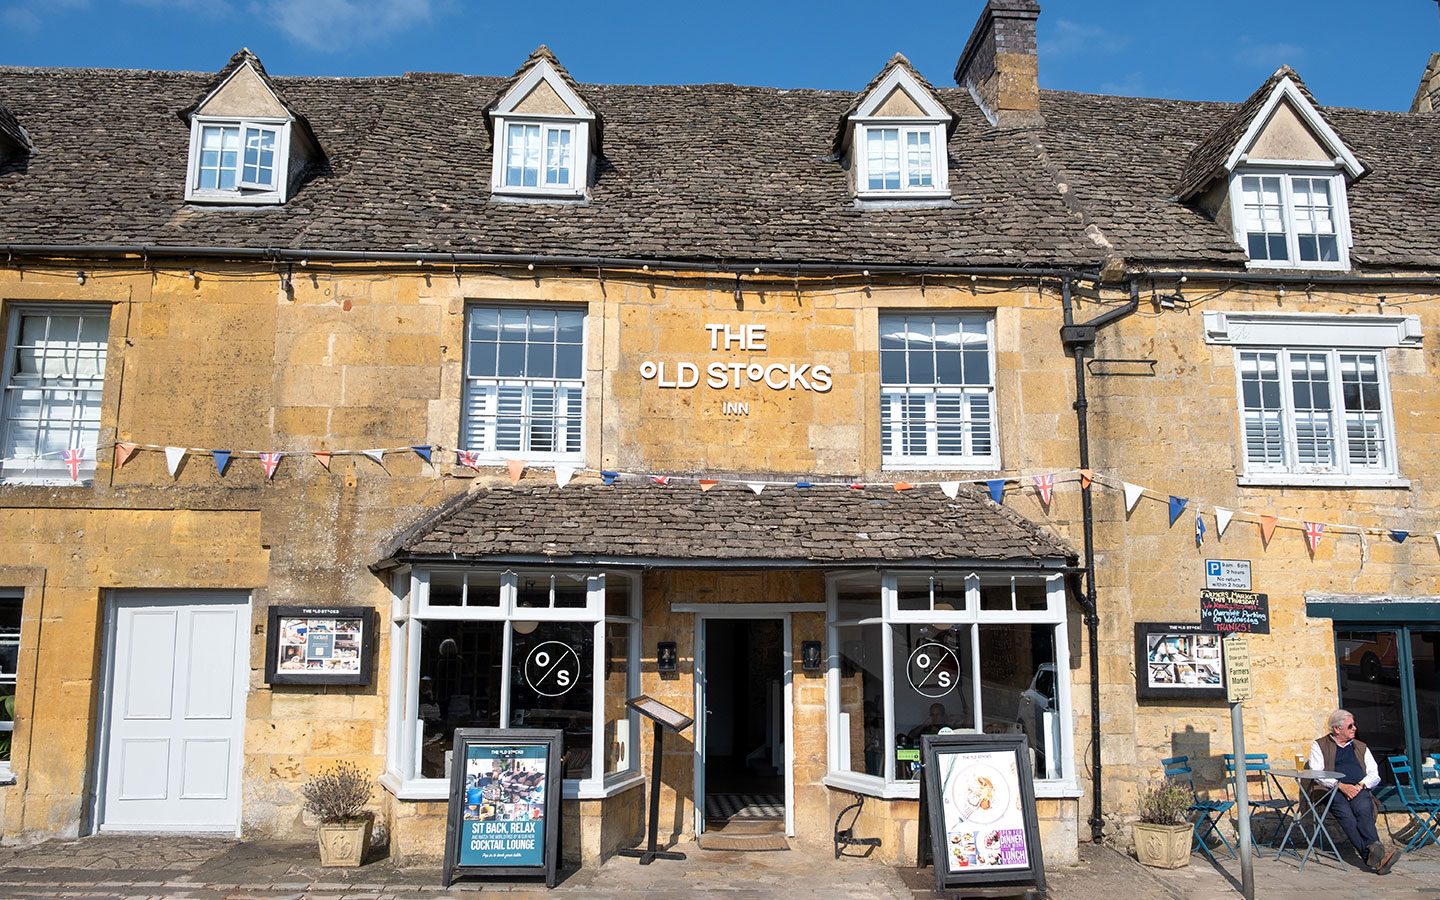 The Old Stocks Inn pub in Stow-on-the-Wold